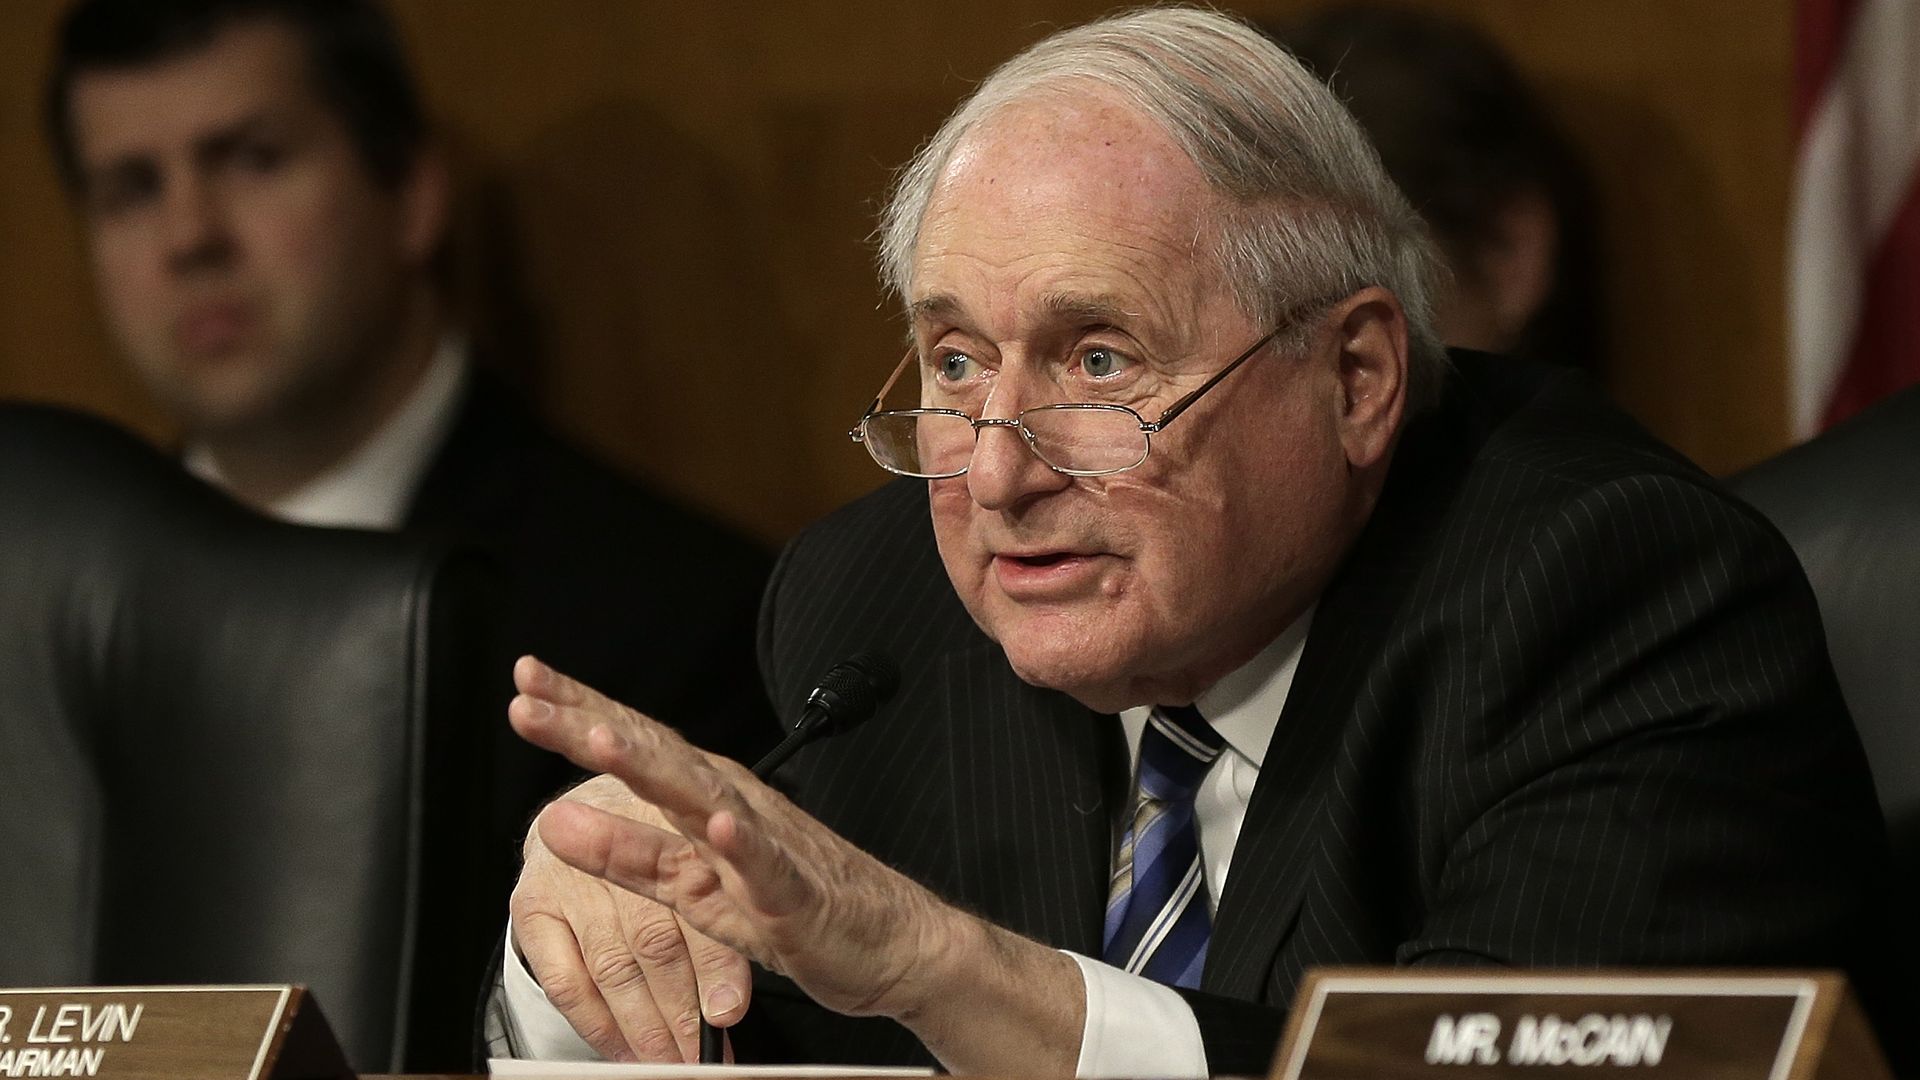 Sen. Carl Levin gestures while seated at a podium